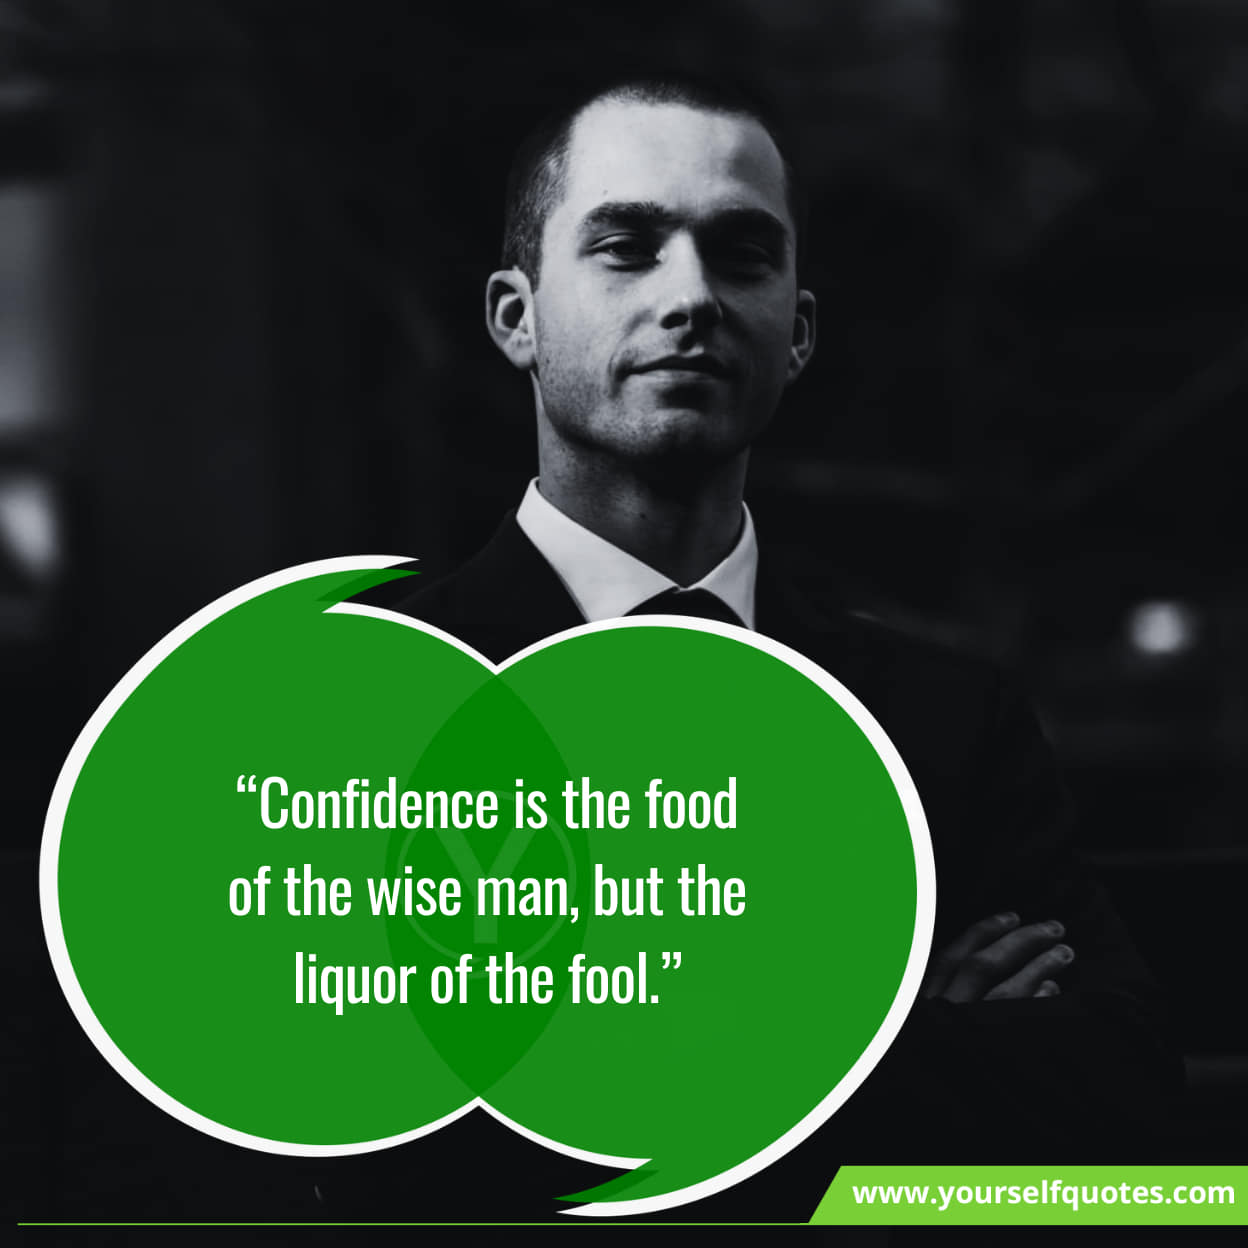 Best Exciting Self-Confidence Quotes For Growth